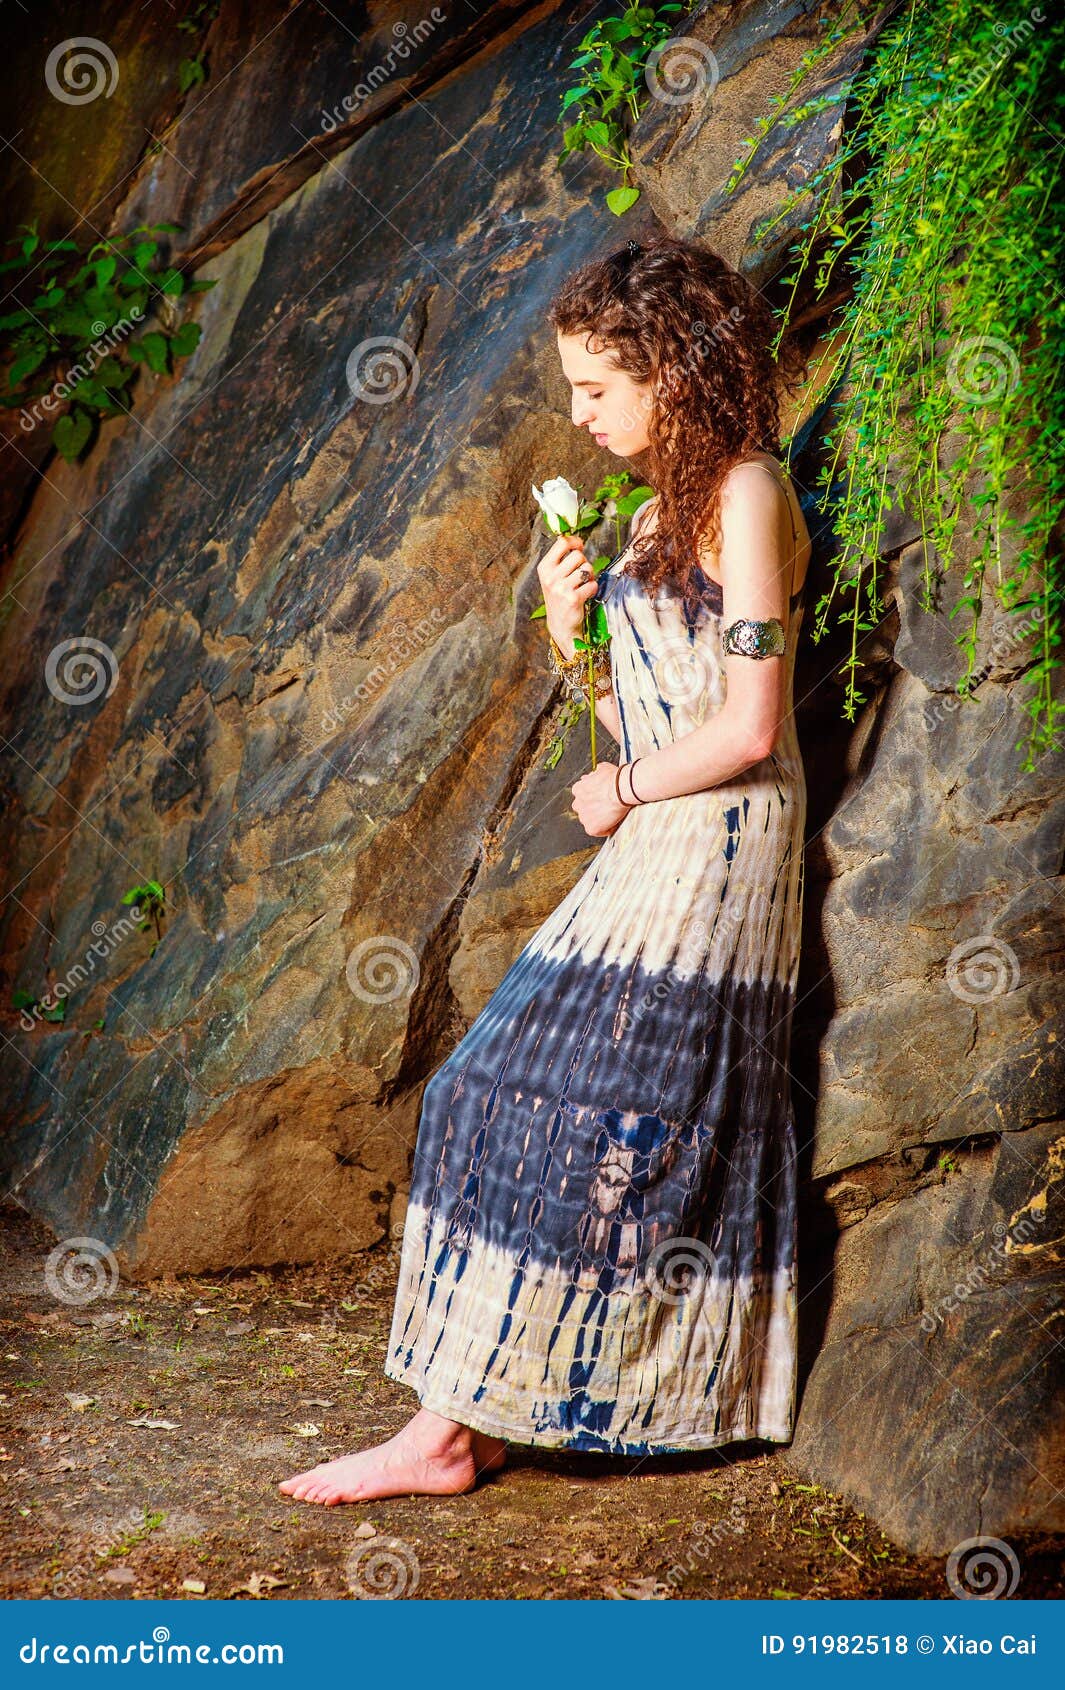 https://thumbs.dreamstime.com/z/young-american-woman-missing-you-white-rose-new-york-girl-dressing-patterned-long-dress-bracelet-barefoot-beautiful-91982518.jpg